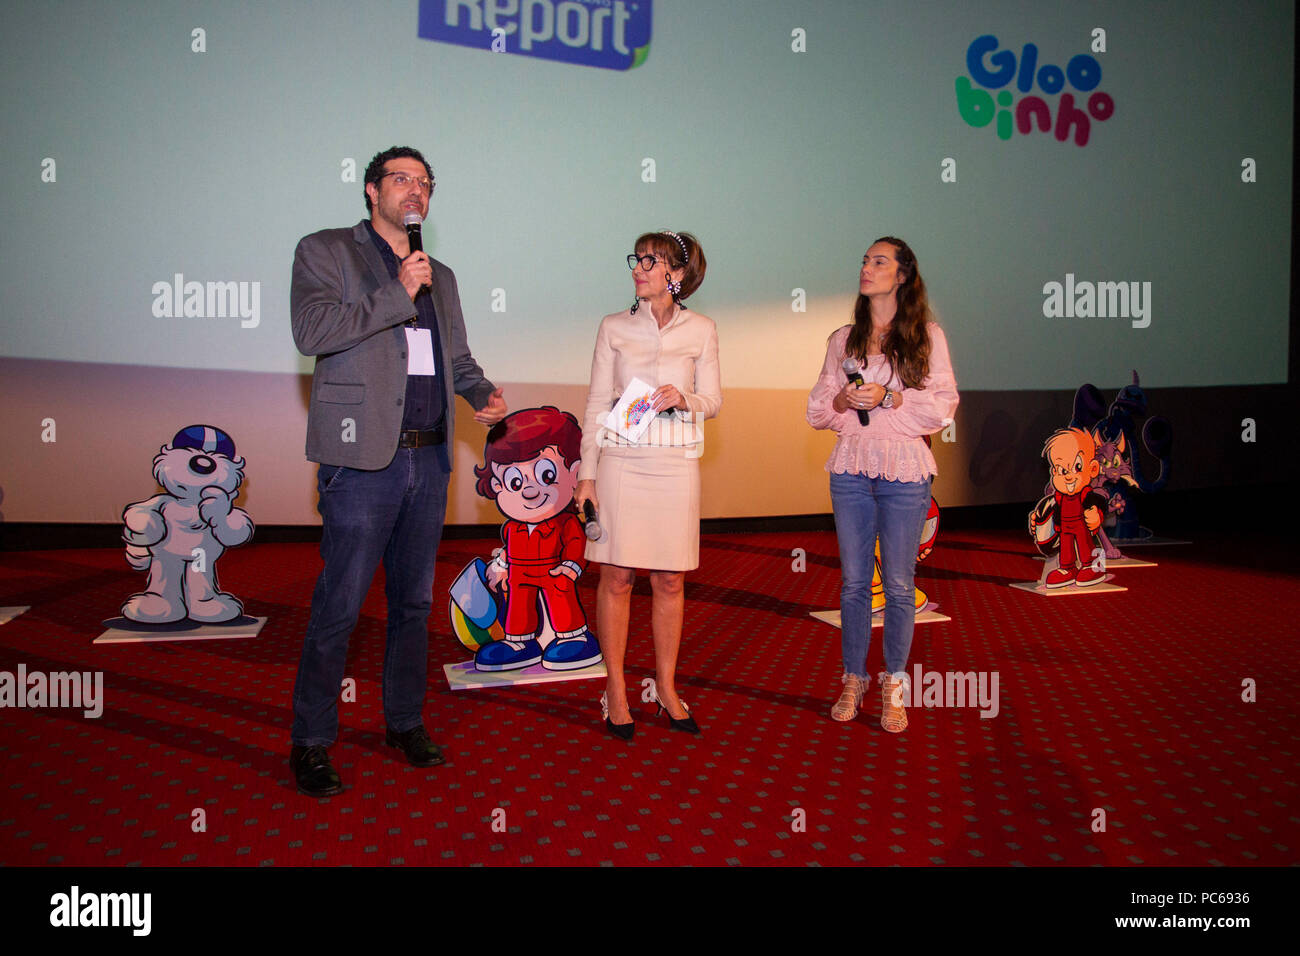 SÃO PAULO, SP - 31.07.2018: ANIMAÇÃO DO SENNINHA É LANÇADA EM SP - This event was held on Tuesday (31) the launch event of the new animated series of the character Senninha that will premiere on 08/08 on Gloobat&#39;s Glat cat channel. The animation that is inspired by three-time Formula 1 champion Ayrton Senna is called &quot;Sena naa na Pista Maluca&quot; (&amotquot;Senninha na Pista Malamp;quot;), which has 26 episodes, each withwith 11 minutes, which wbe shown dai daily at various times. No highlight was the representative of Aramis with Viviane Senna, president of the Ayrton Senna Institu Stock Photo